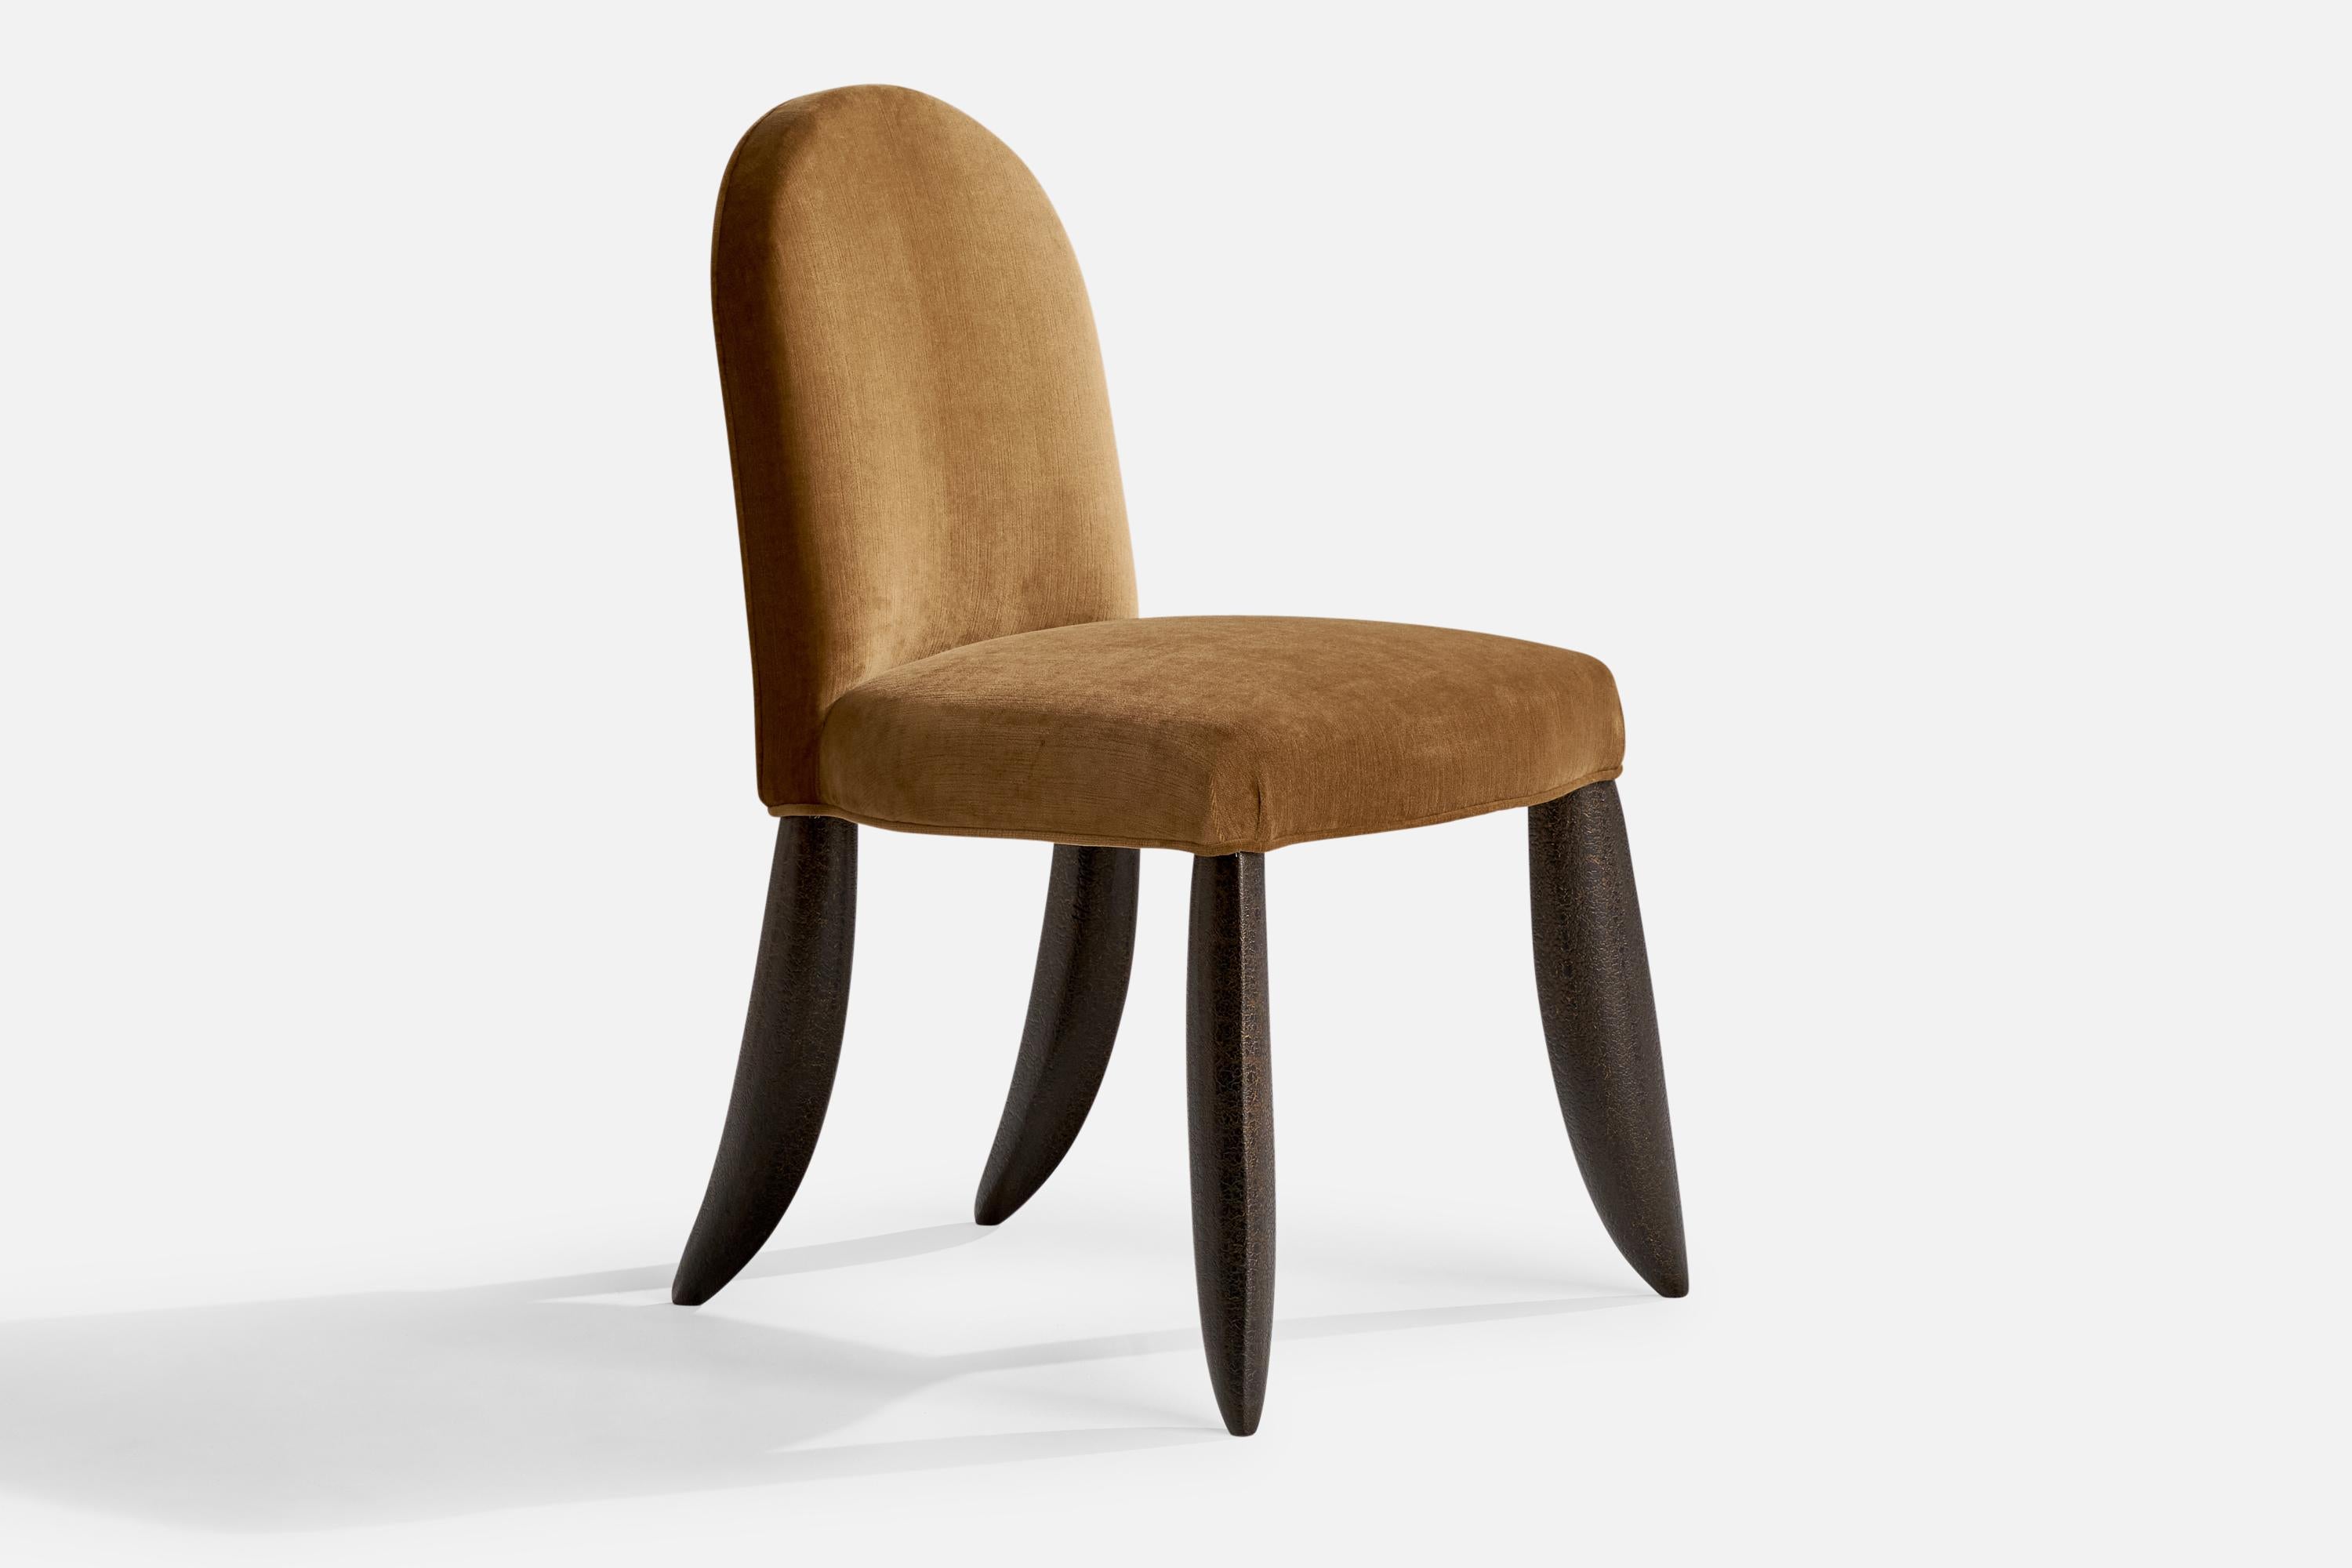 A beige velvet and textured black-painted mahogany side chair designed and produced by Wendell Castle, USA, 1997.

Seat height 18”